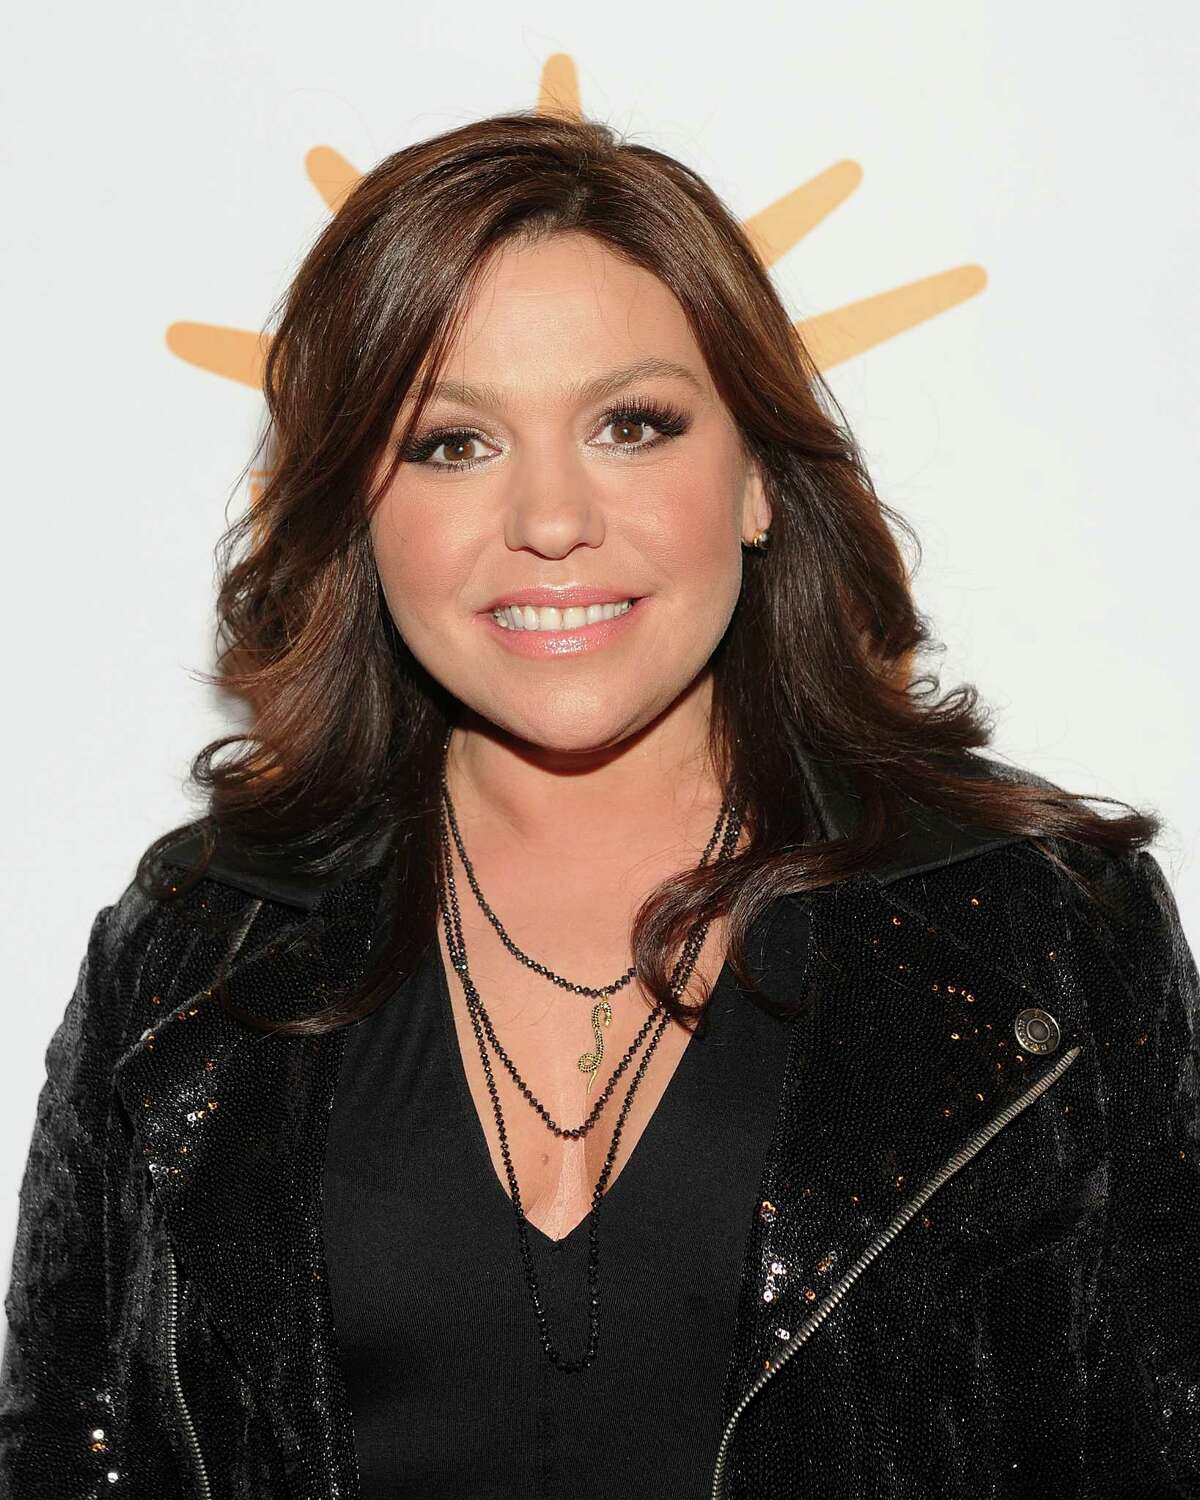 Lake George and Glens Falls Rachael Ray  Food network personality, celebrity chef and author.